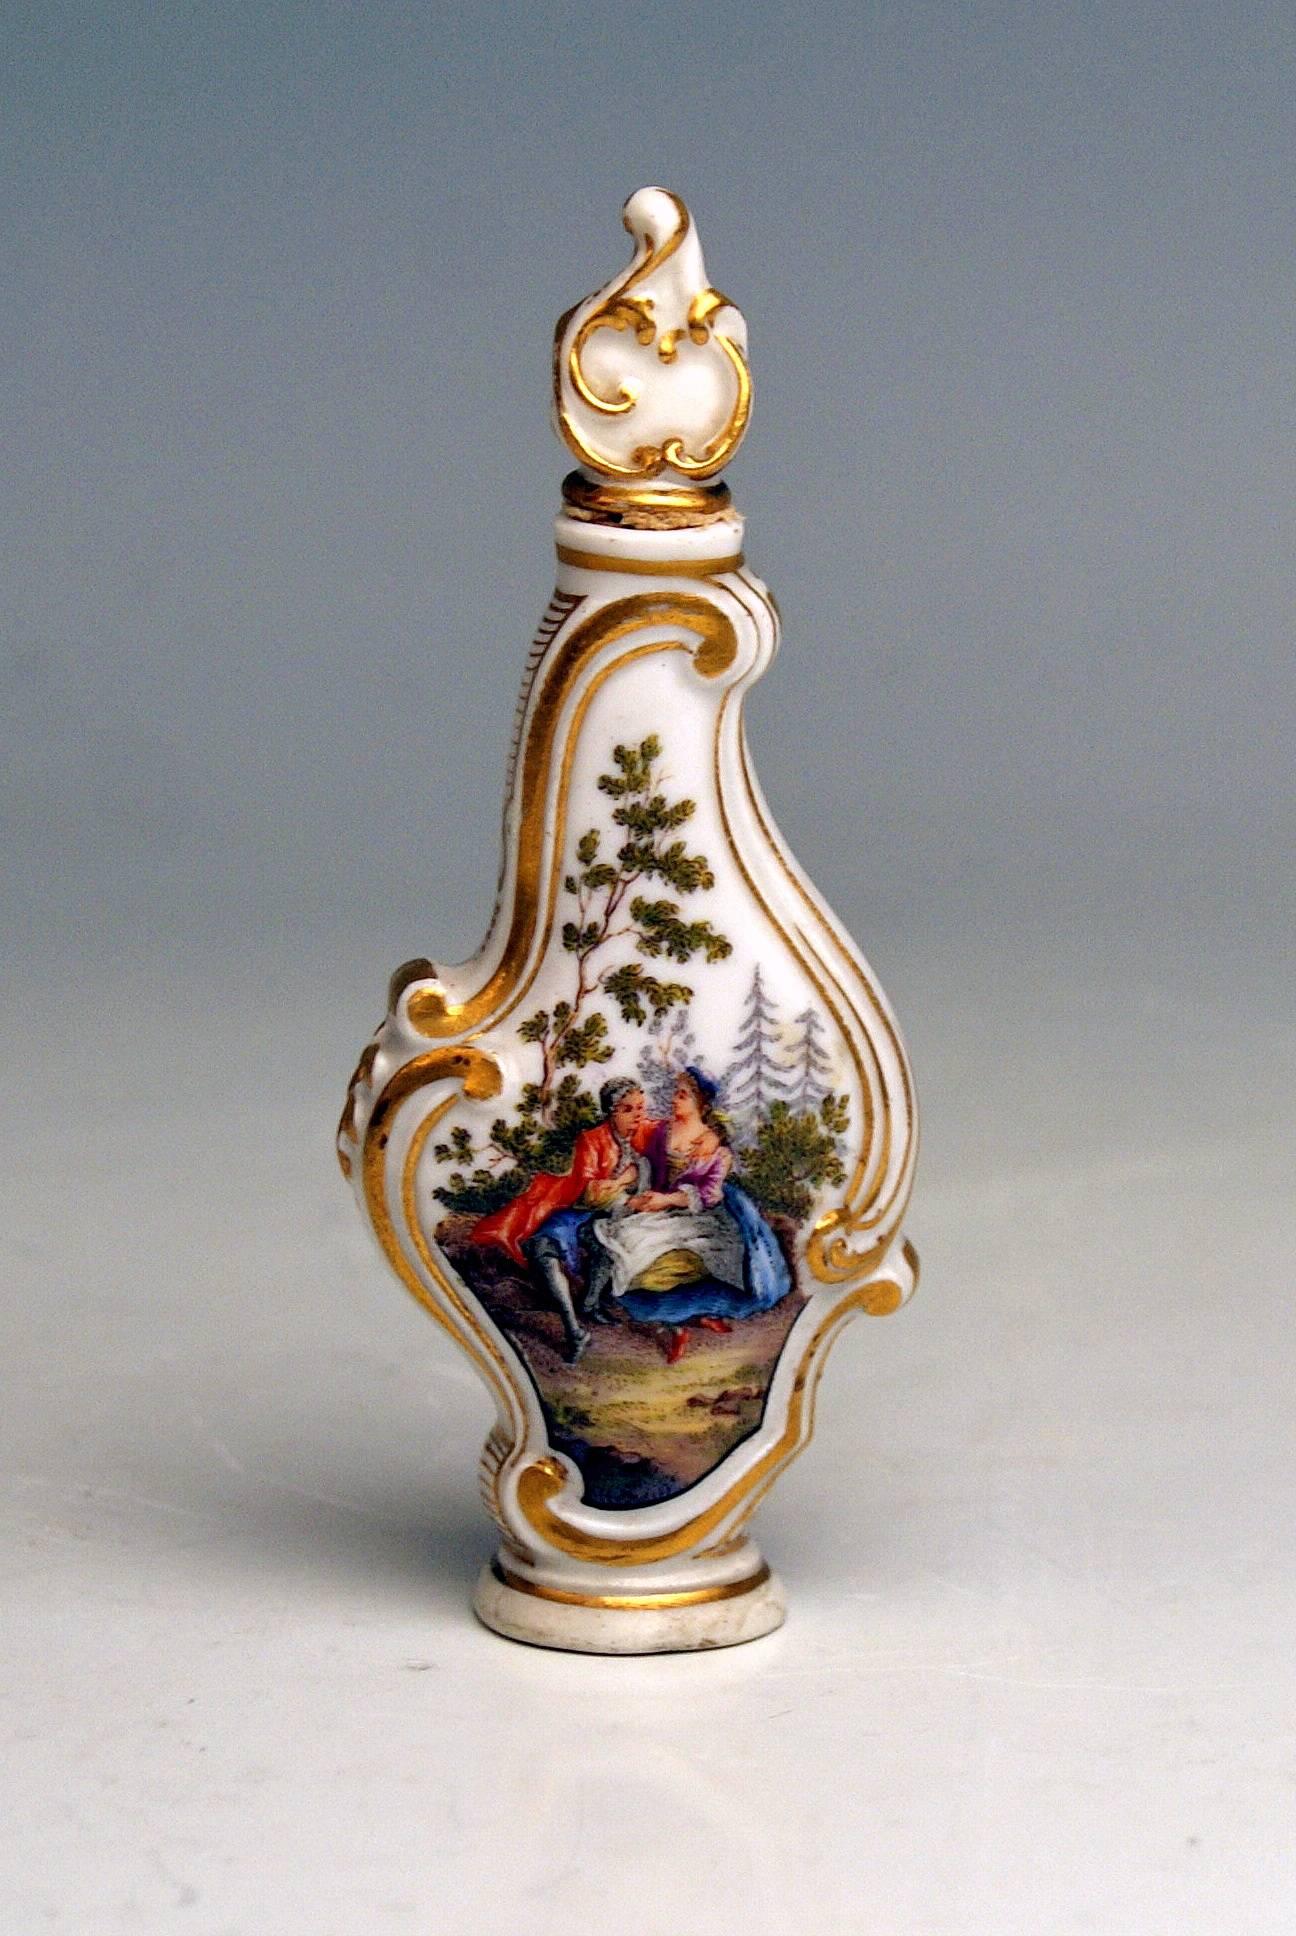 Meissen nicest rare scent bottle en miniature
Please note: Abundantly painted with Watteau scenes!

Manufactory: Meissen 
Dating: made during first half of 19th century (circa 1850)
Hallmarked: Meissen mark with pommels on hilts (19th